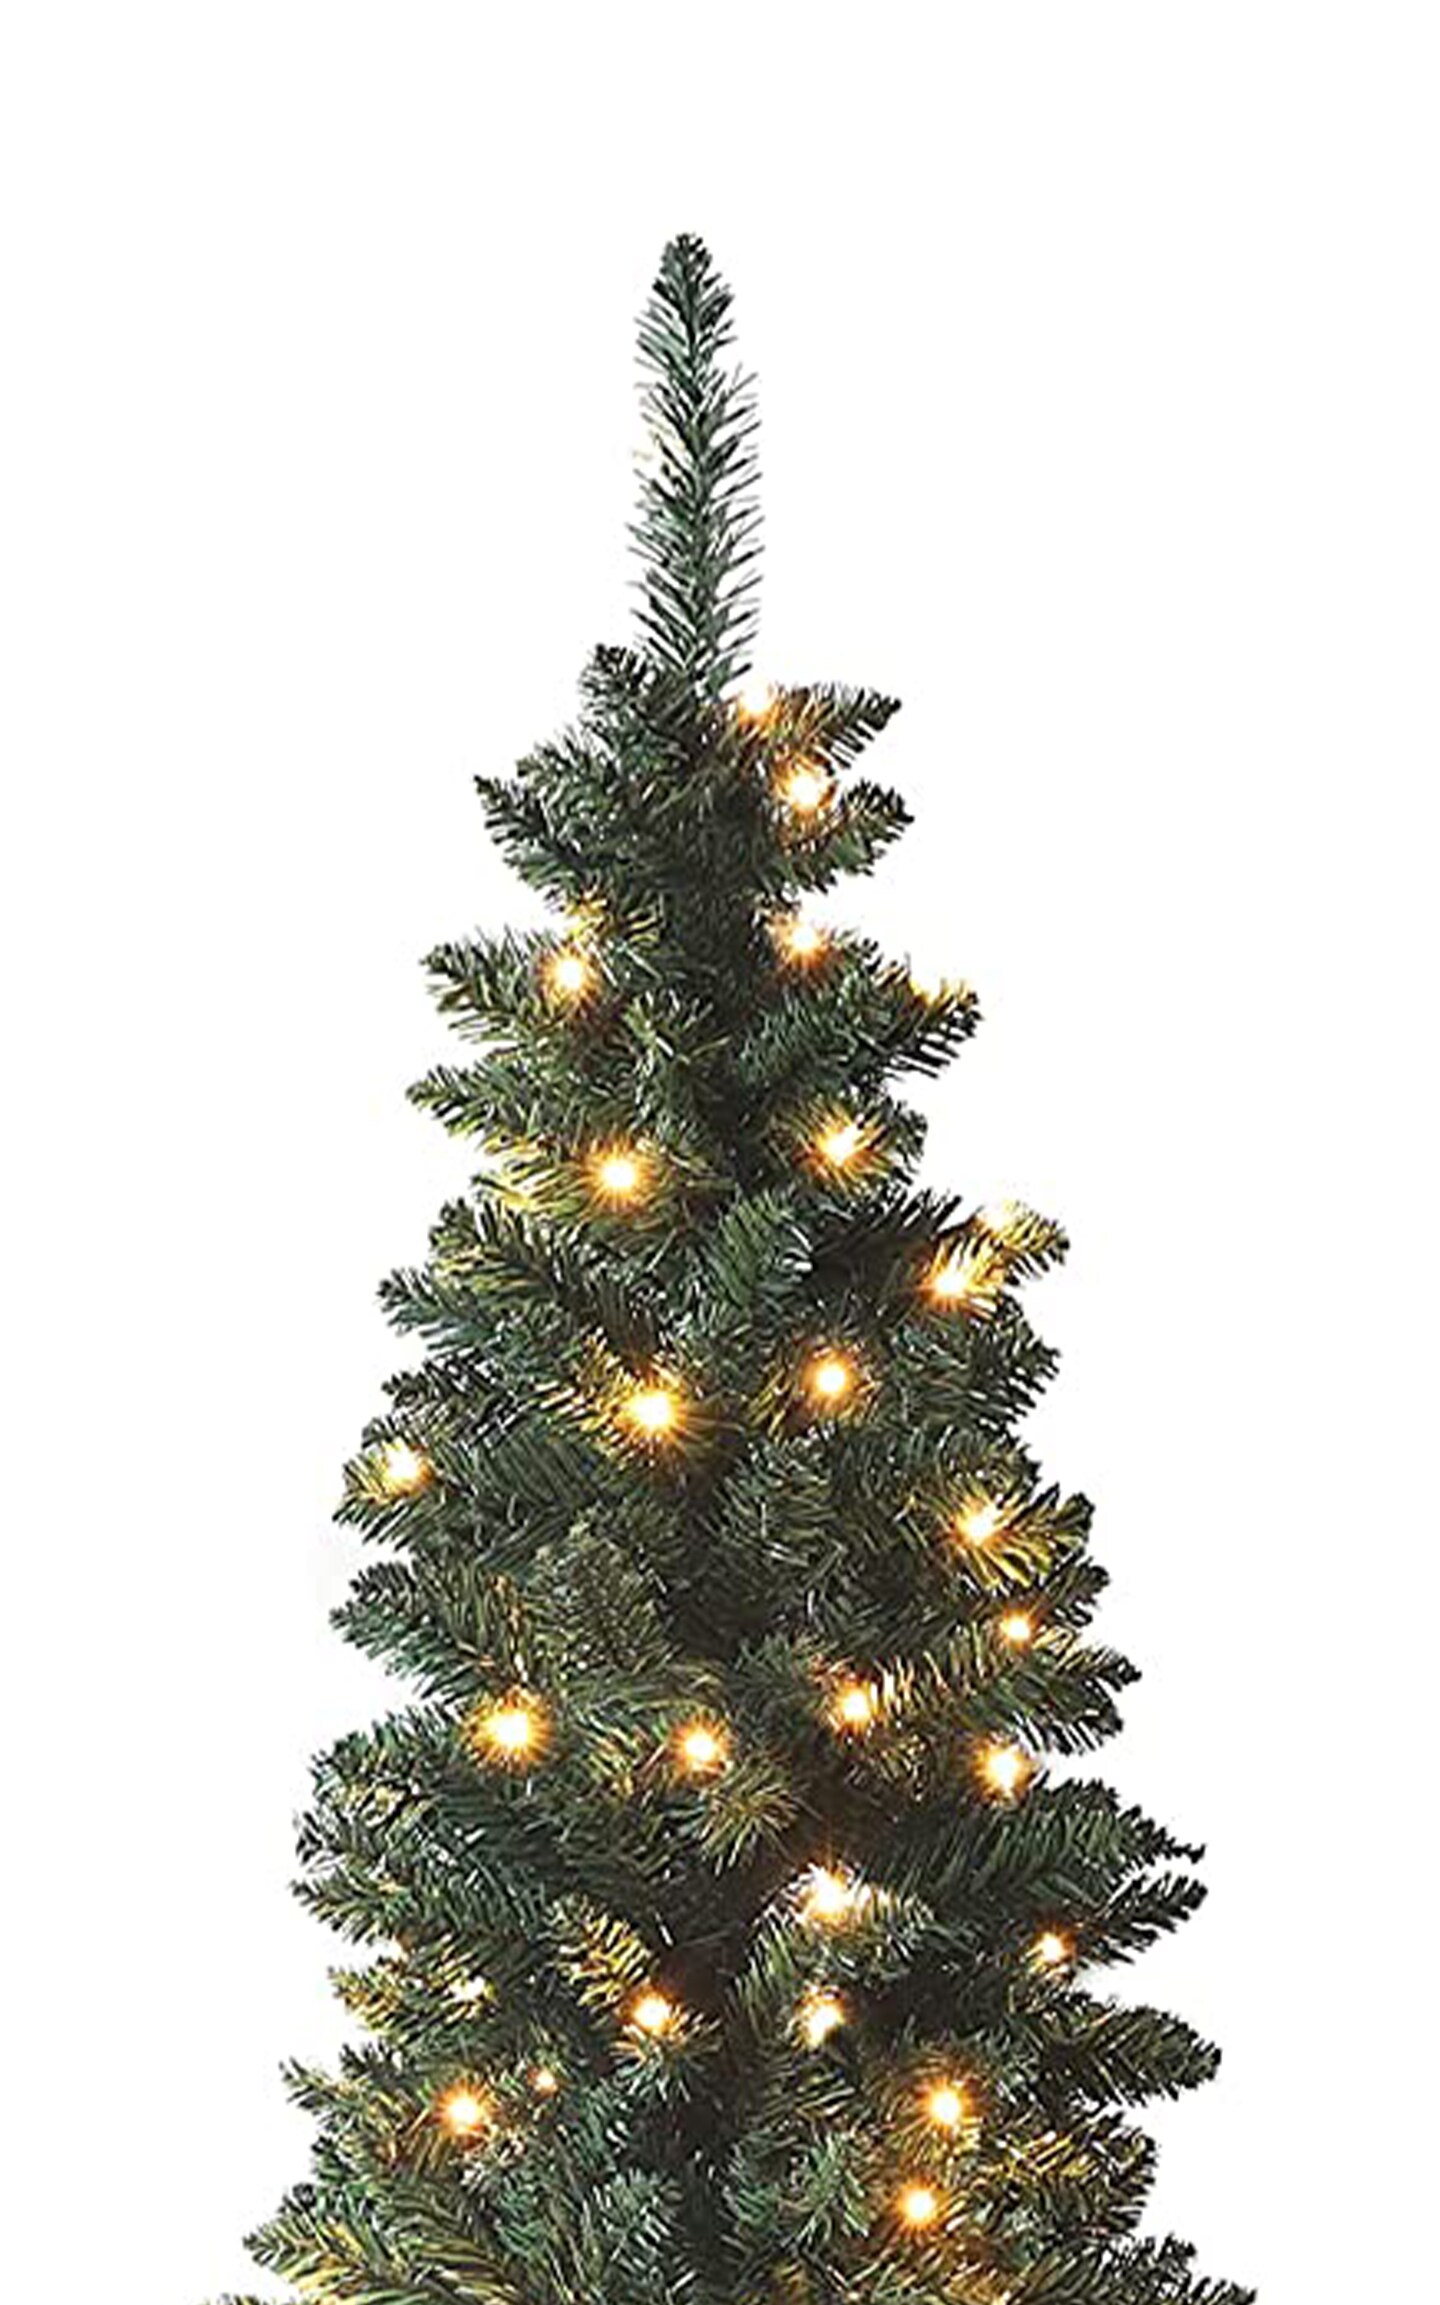 Slim Pencil Green Christmas Tree - Artificial Linden Spruce with Premium PVC Needles - Sturdy Metal Stand Included - Ideal for Compact Spaces - Effortless Assembly and Elegant Holiday D&#xE9;cor